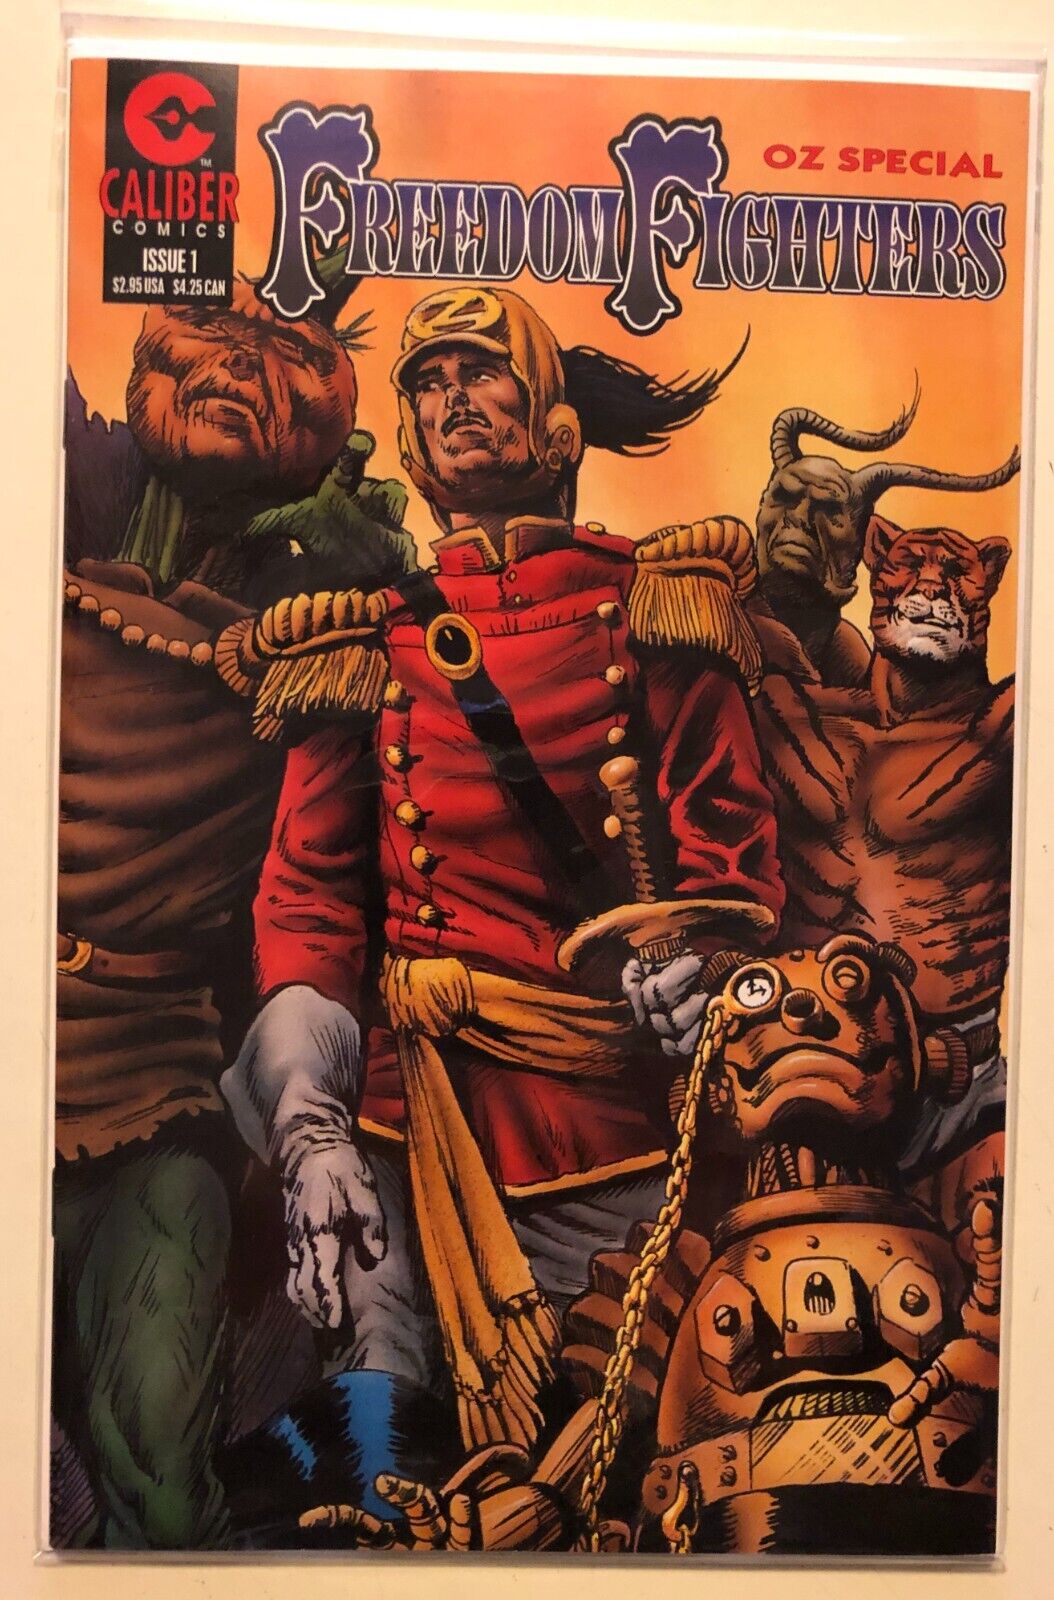 OZ Special : Freedom Fighters #1 ~ Caliber Comics 1995 One-Shot (Wizard of Oz)